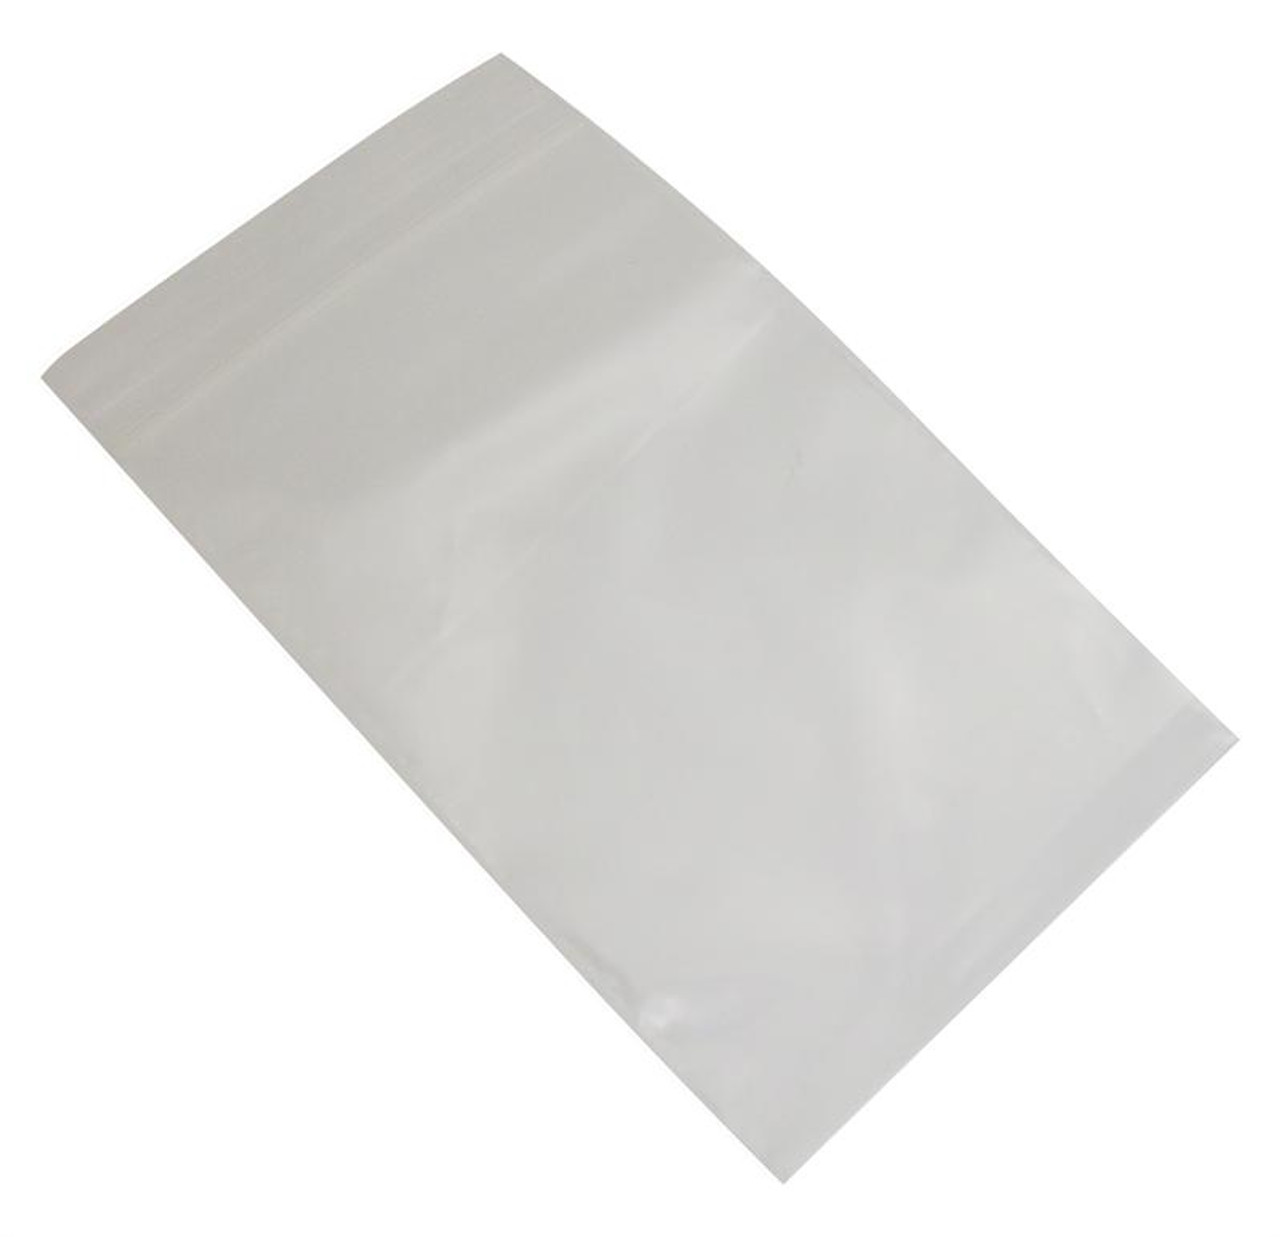 Economy Zip-Lock Bags with White Block for Notes Pkg of 100 (Choose Size)